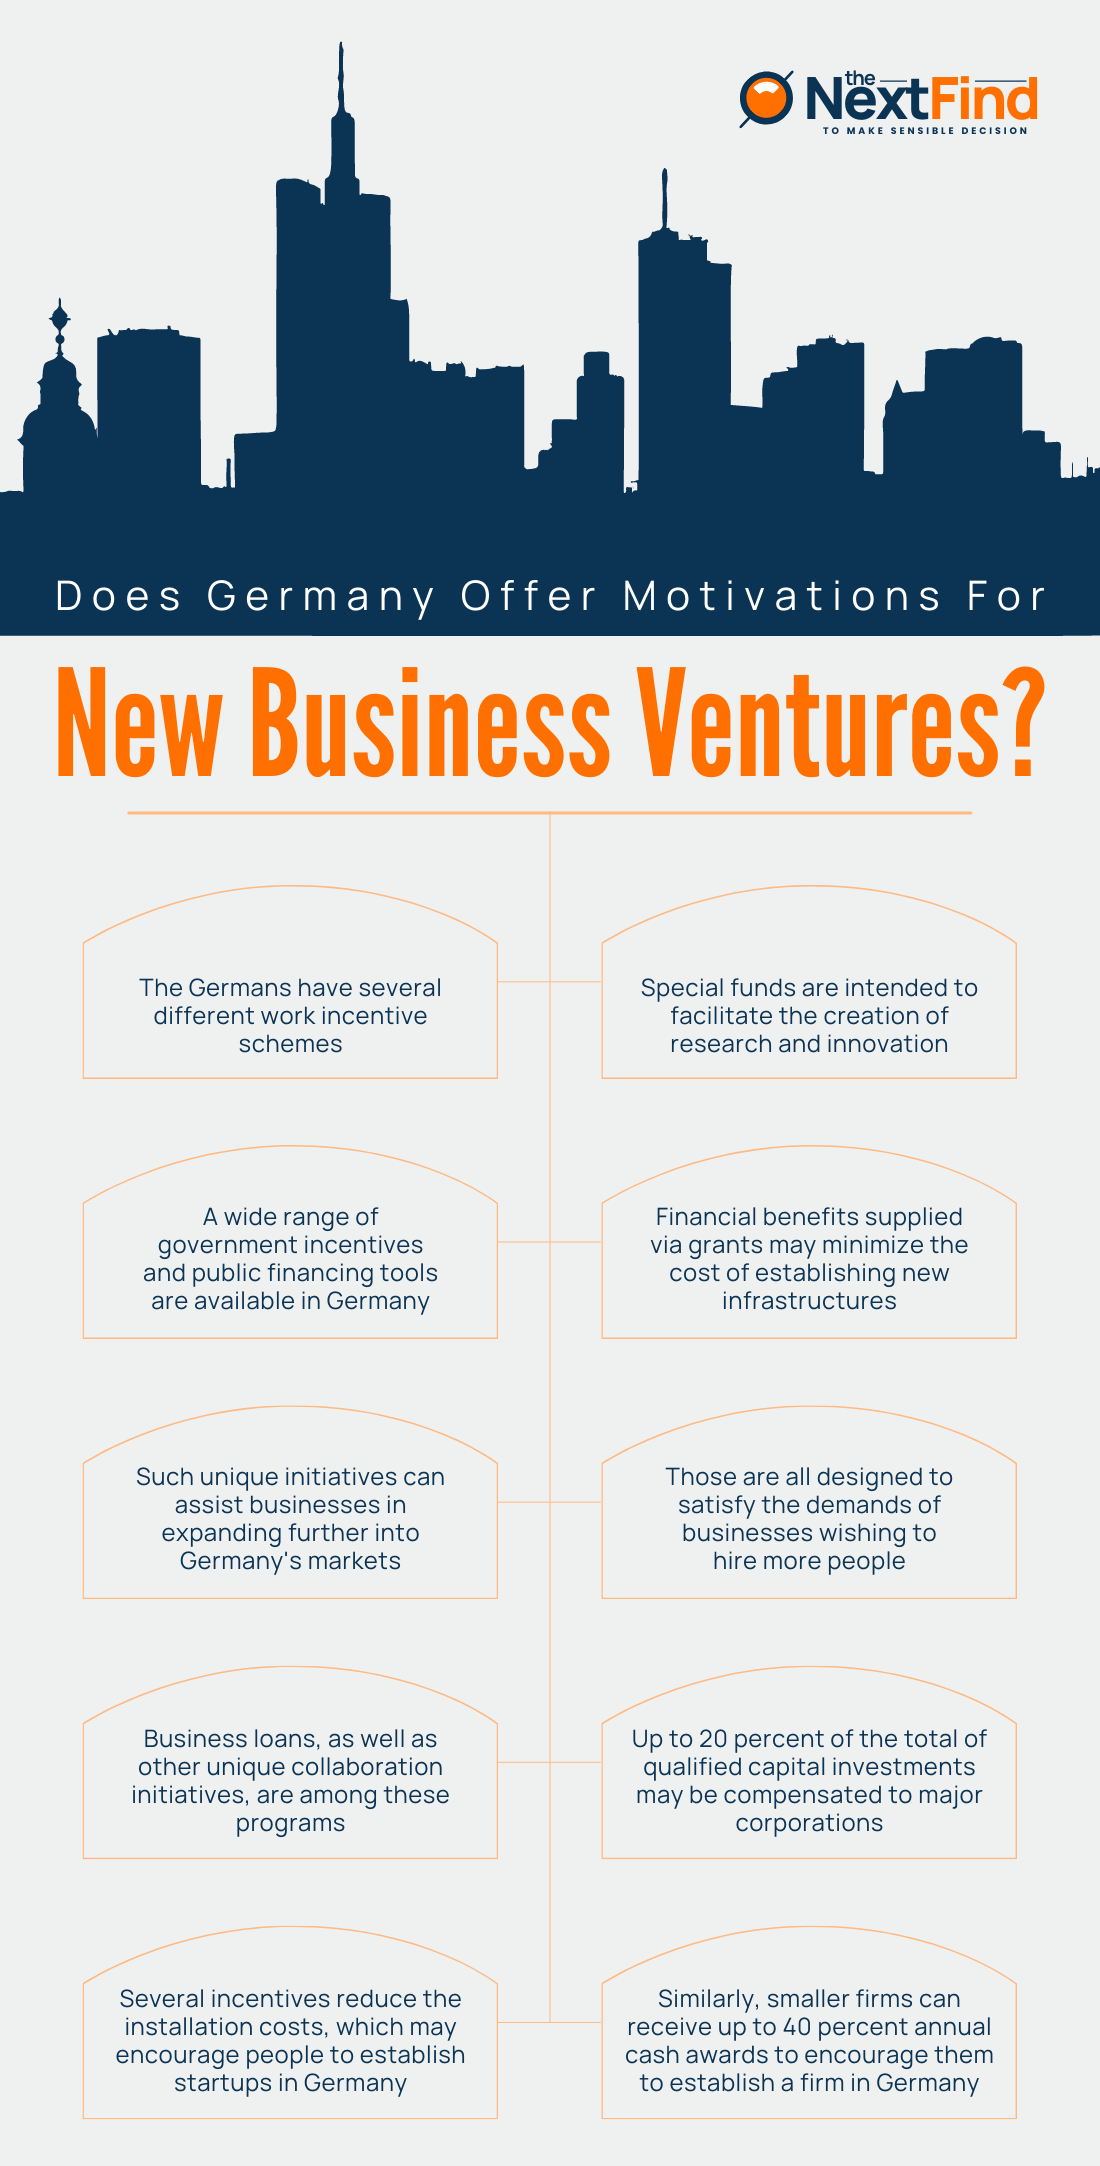 Does Germany Offer Motivations For New Business Ventures